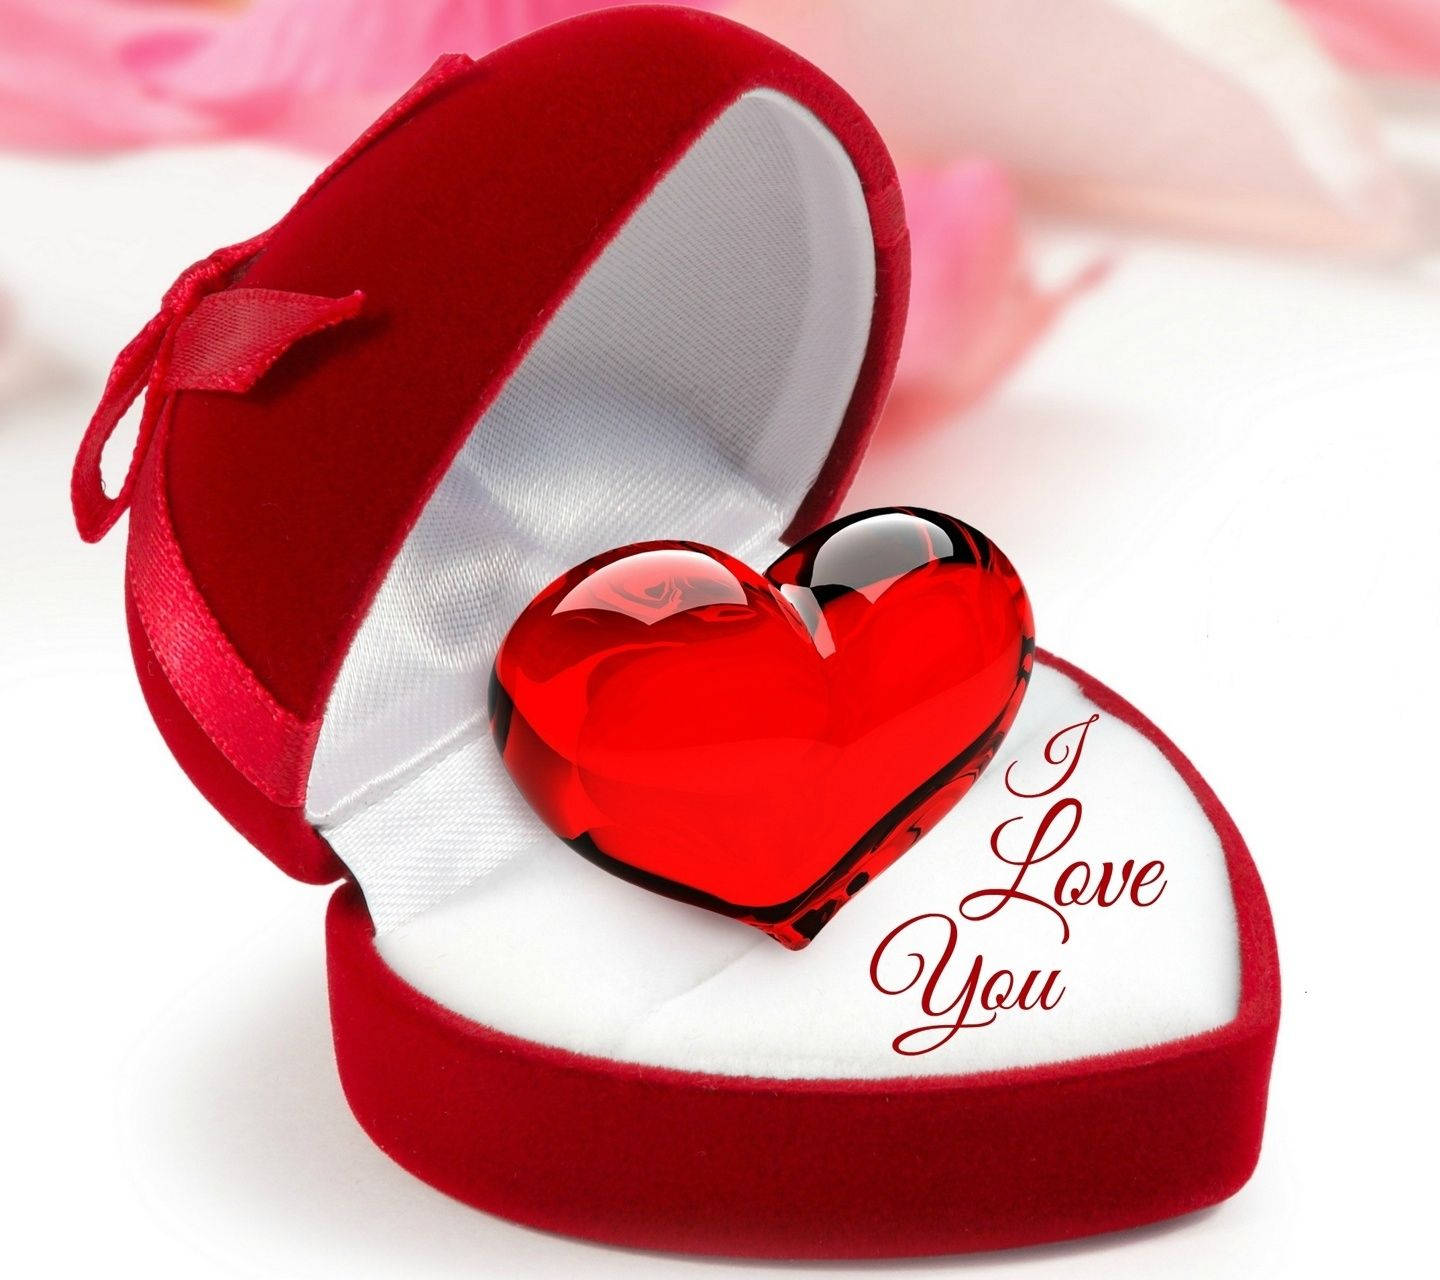 Cute Heart In Engagement Ring Box Background